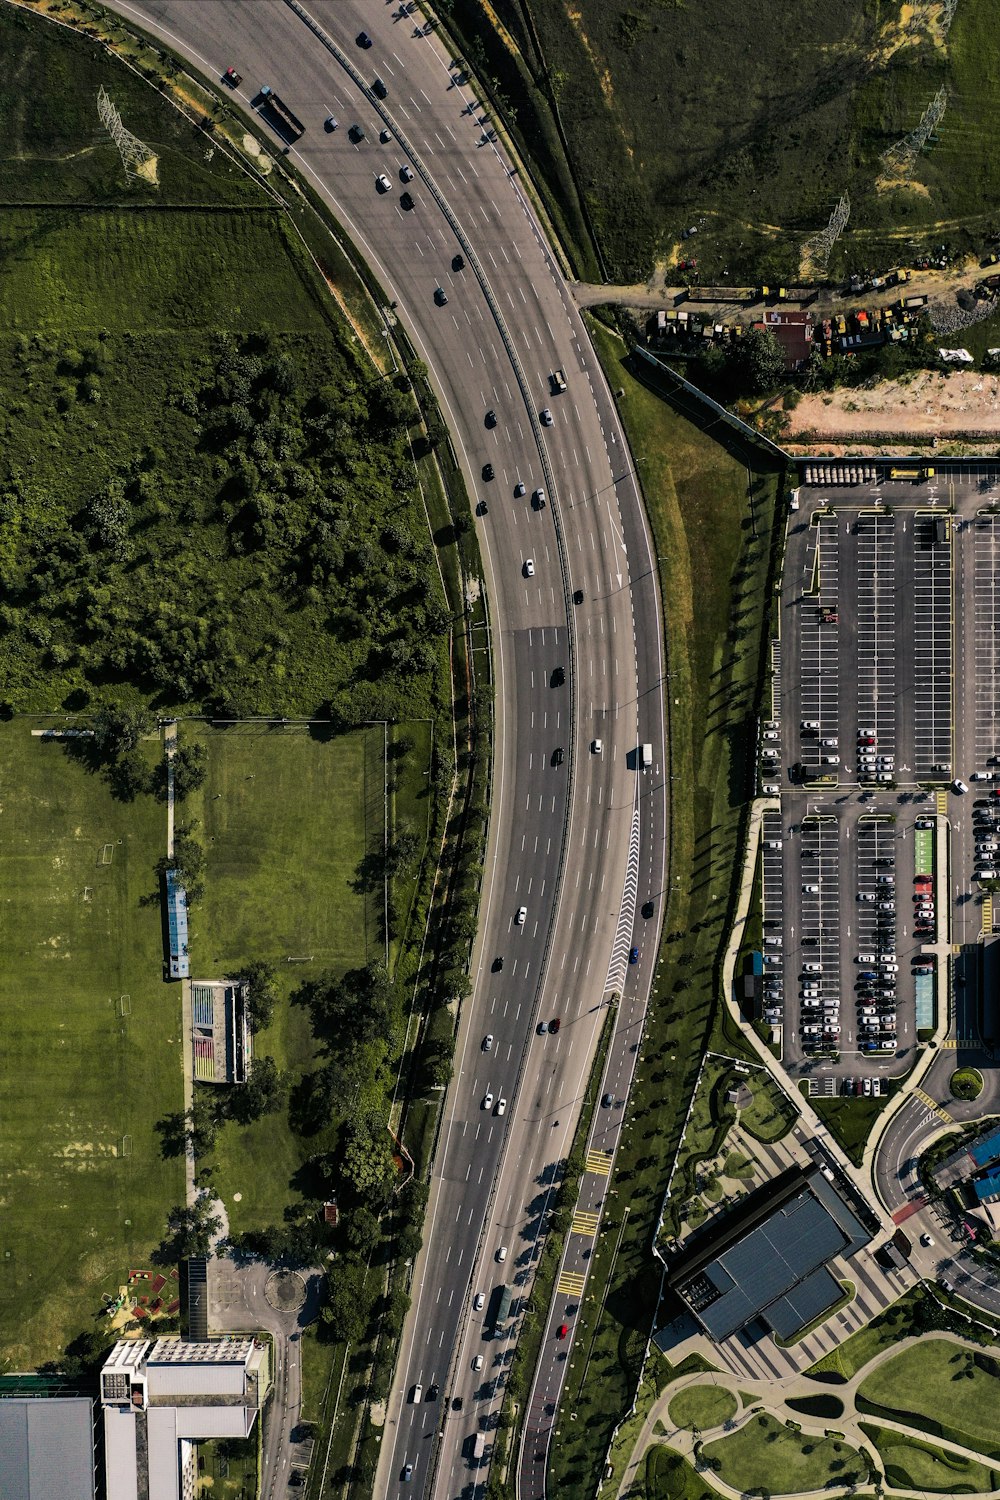 aerial view of vehicles on road